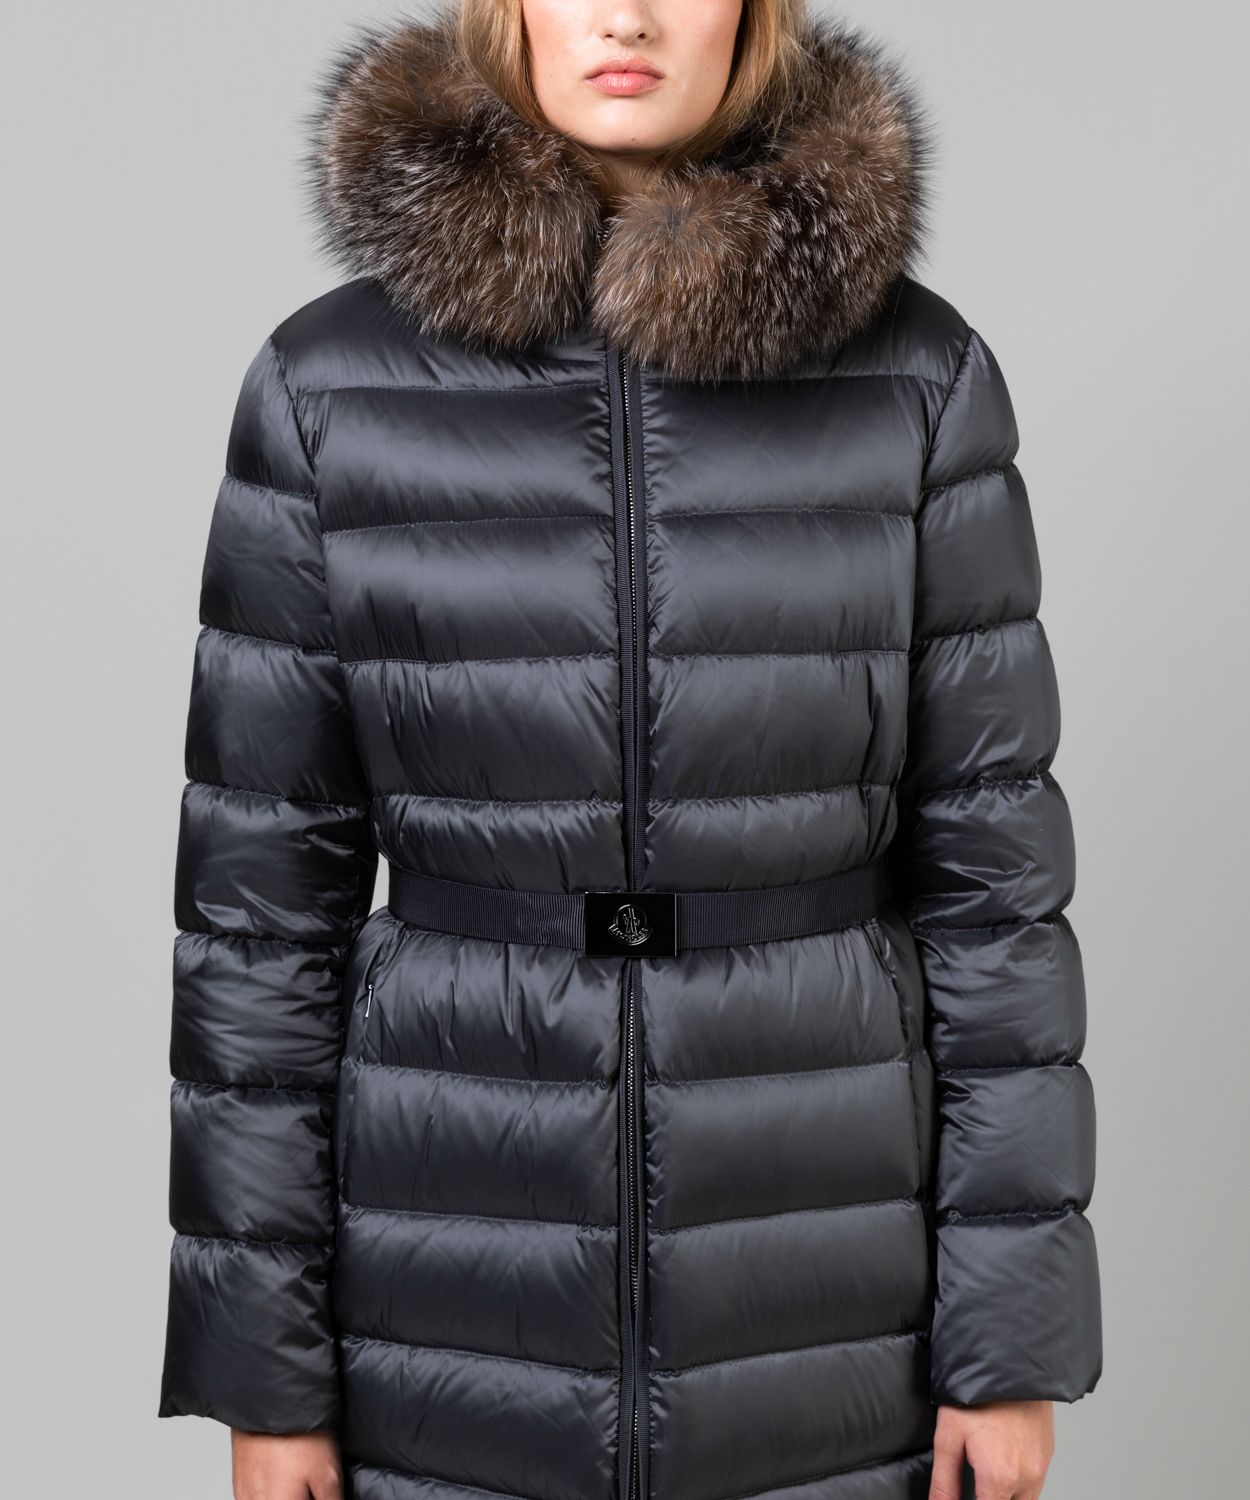 moncler jacket with fur hood womens